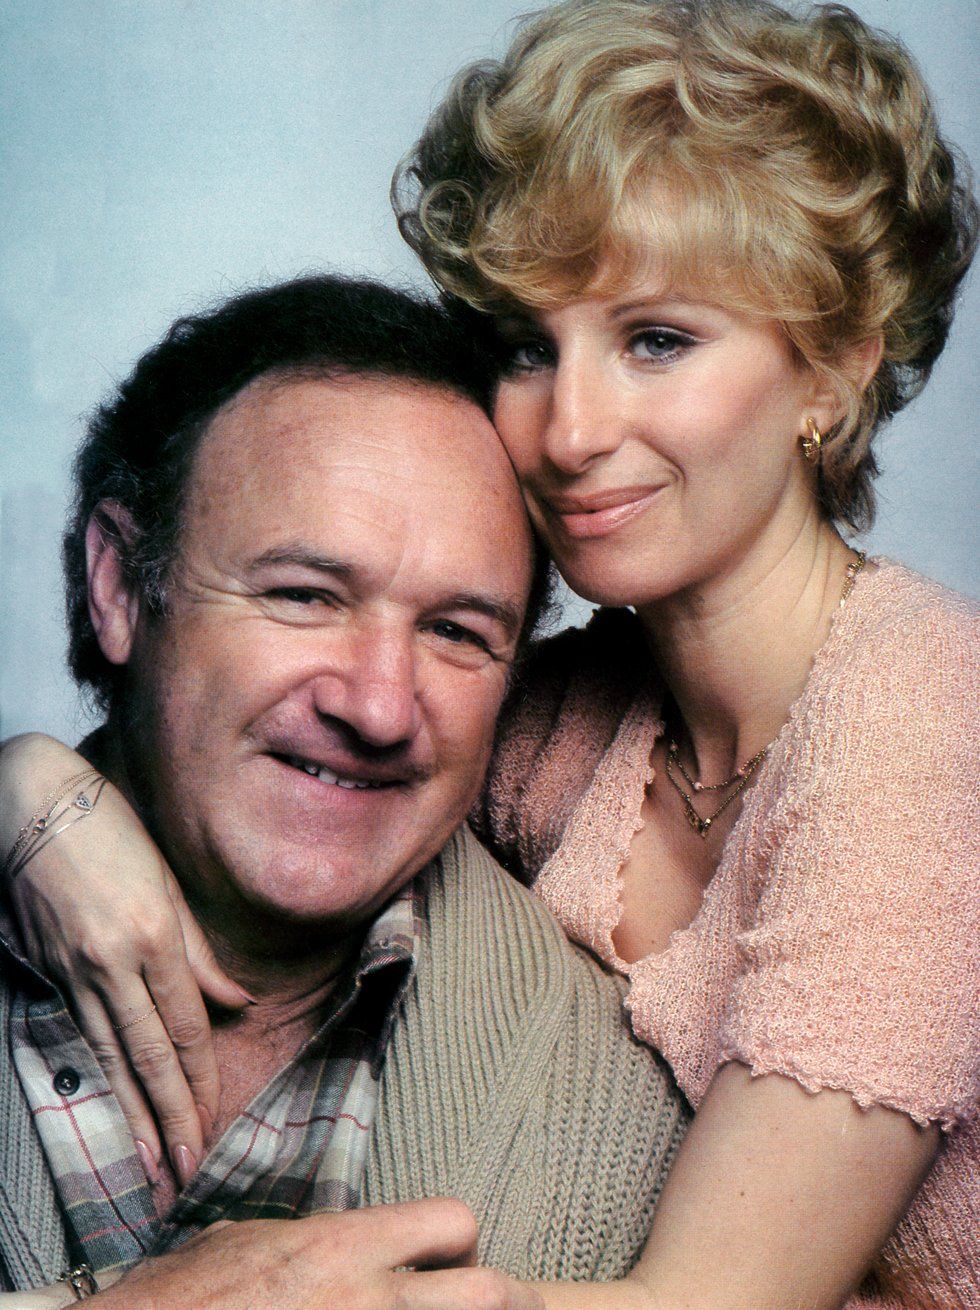 Gene Hackman and Barbra Streisand pose together in costume.